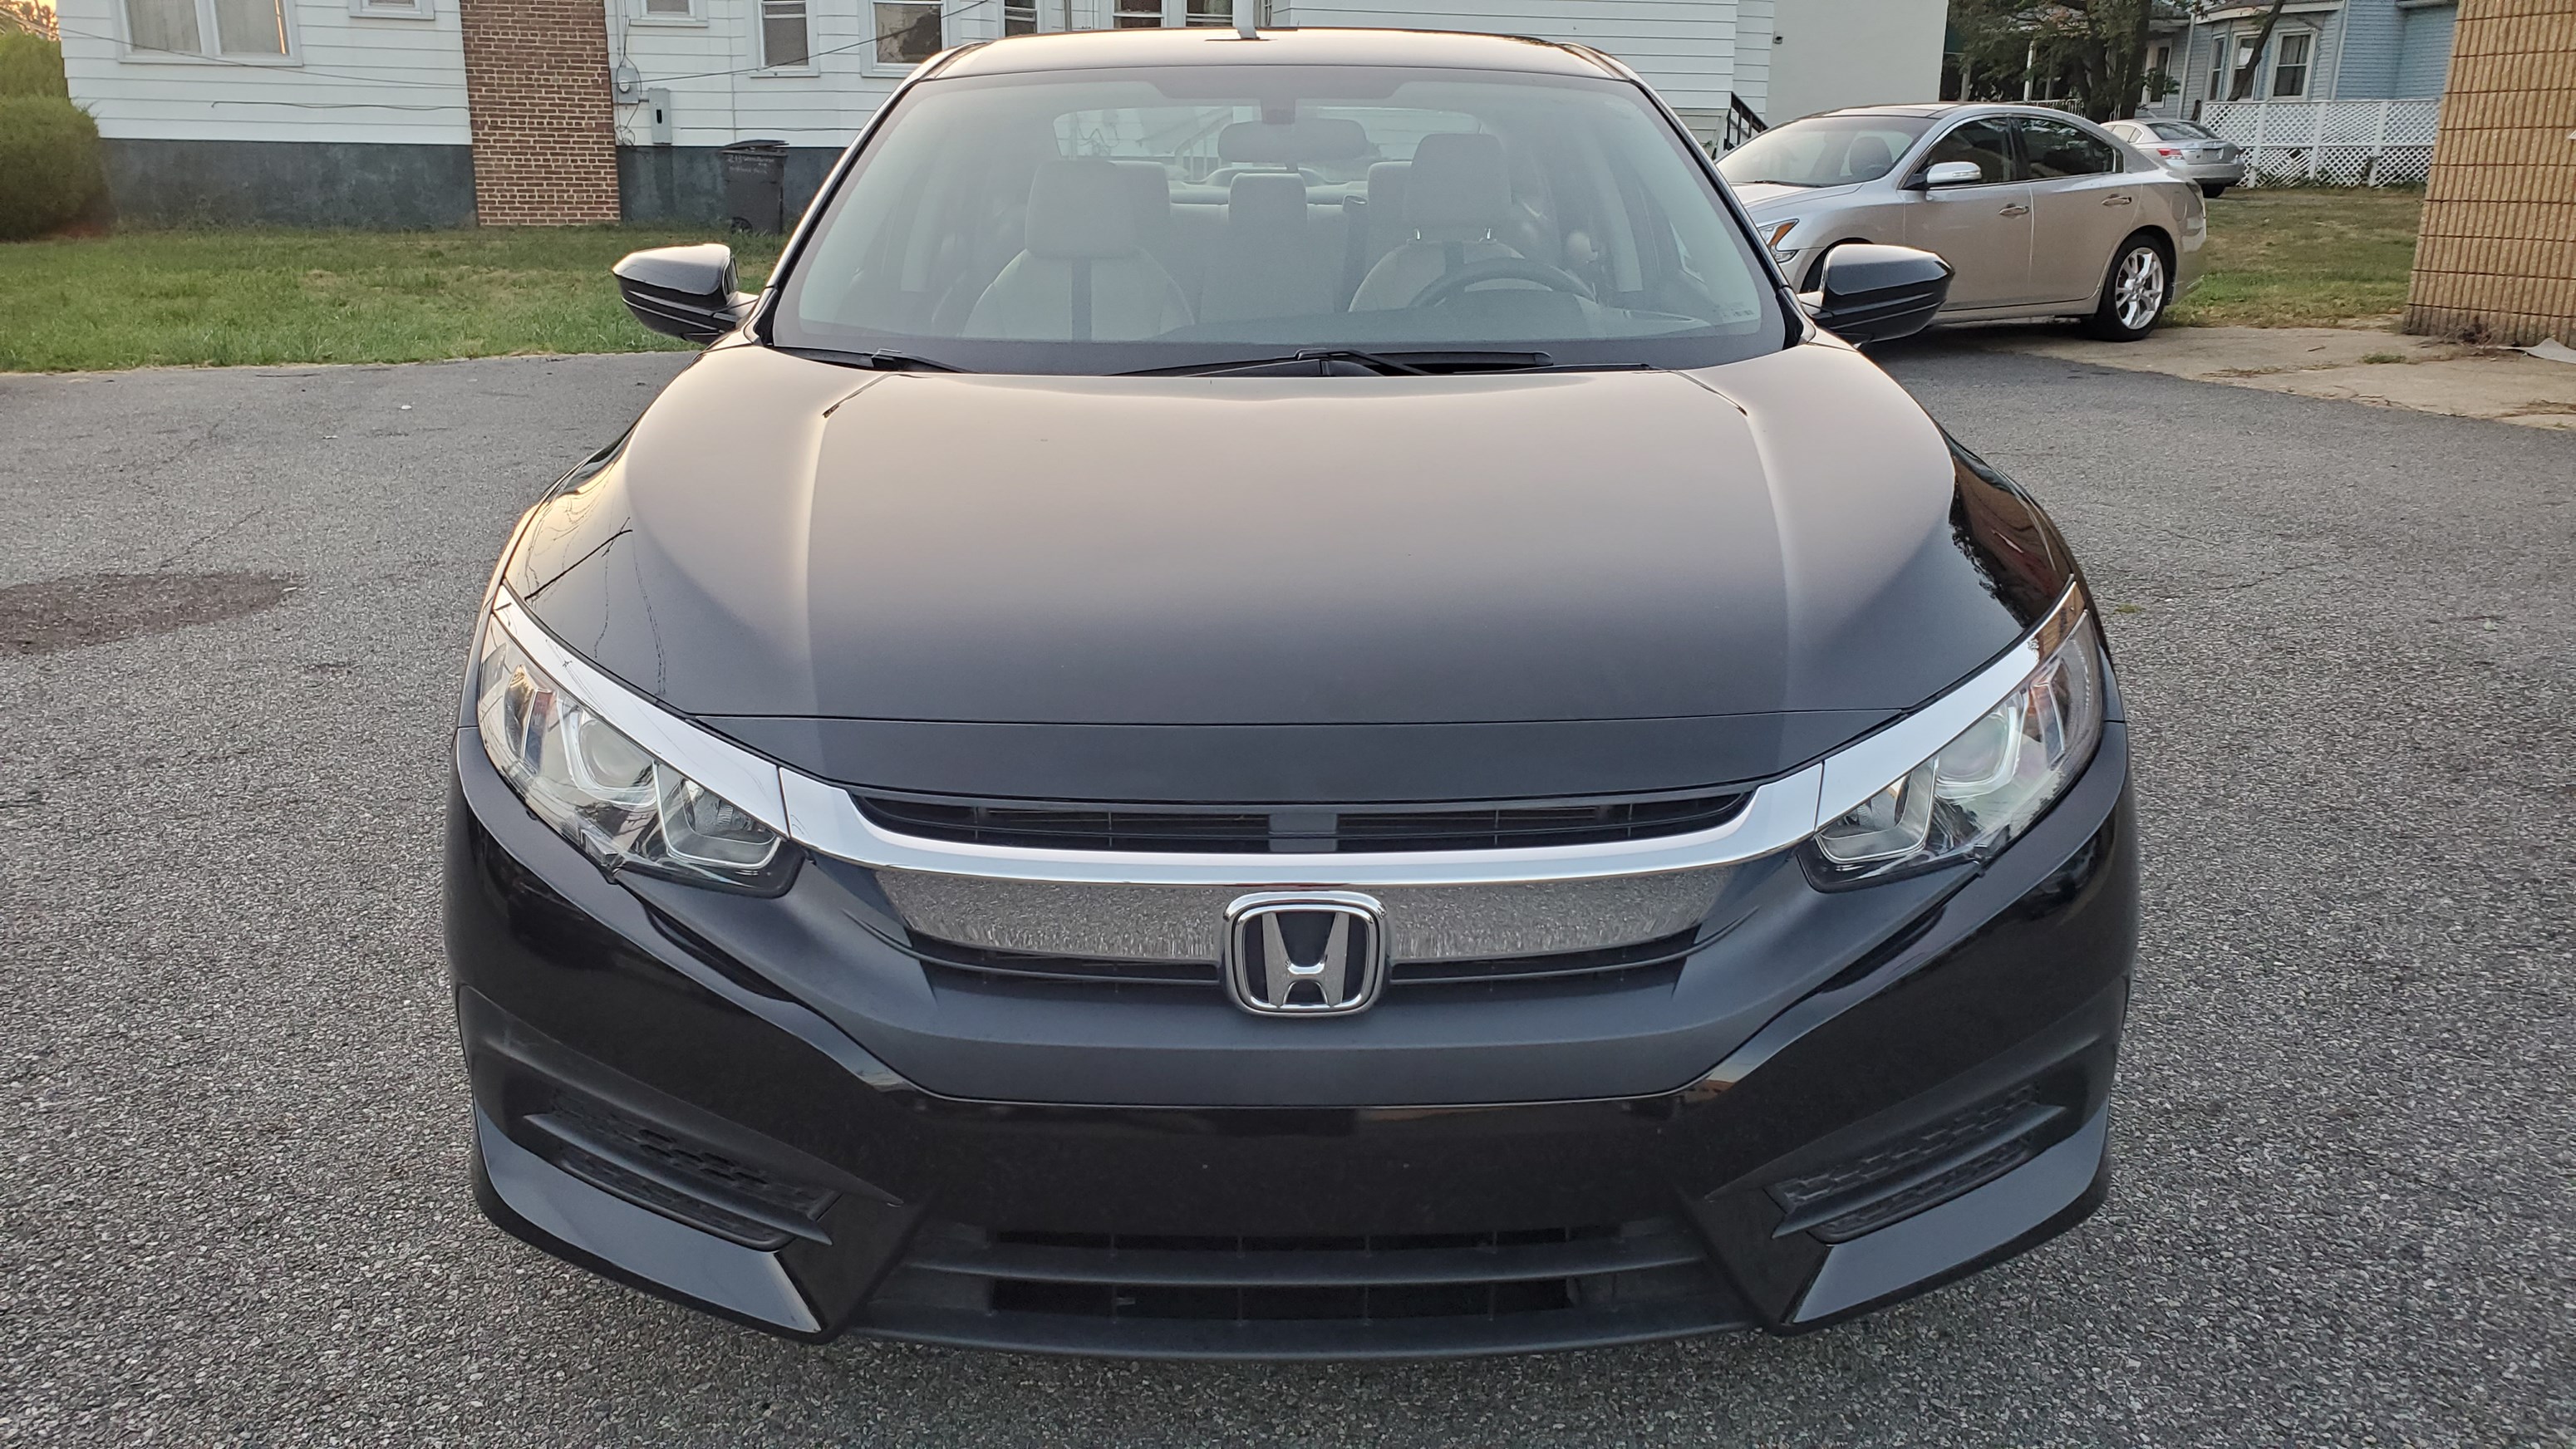 2018 HONDA CIVIC LX 2.0L 4-CYLINDER CLEAN CARFAX 1-OWNER! ONLY 33K